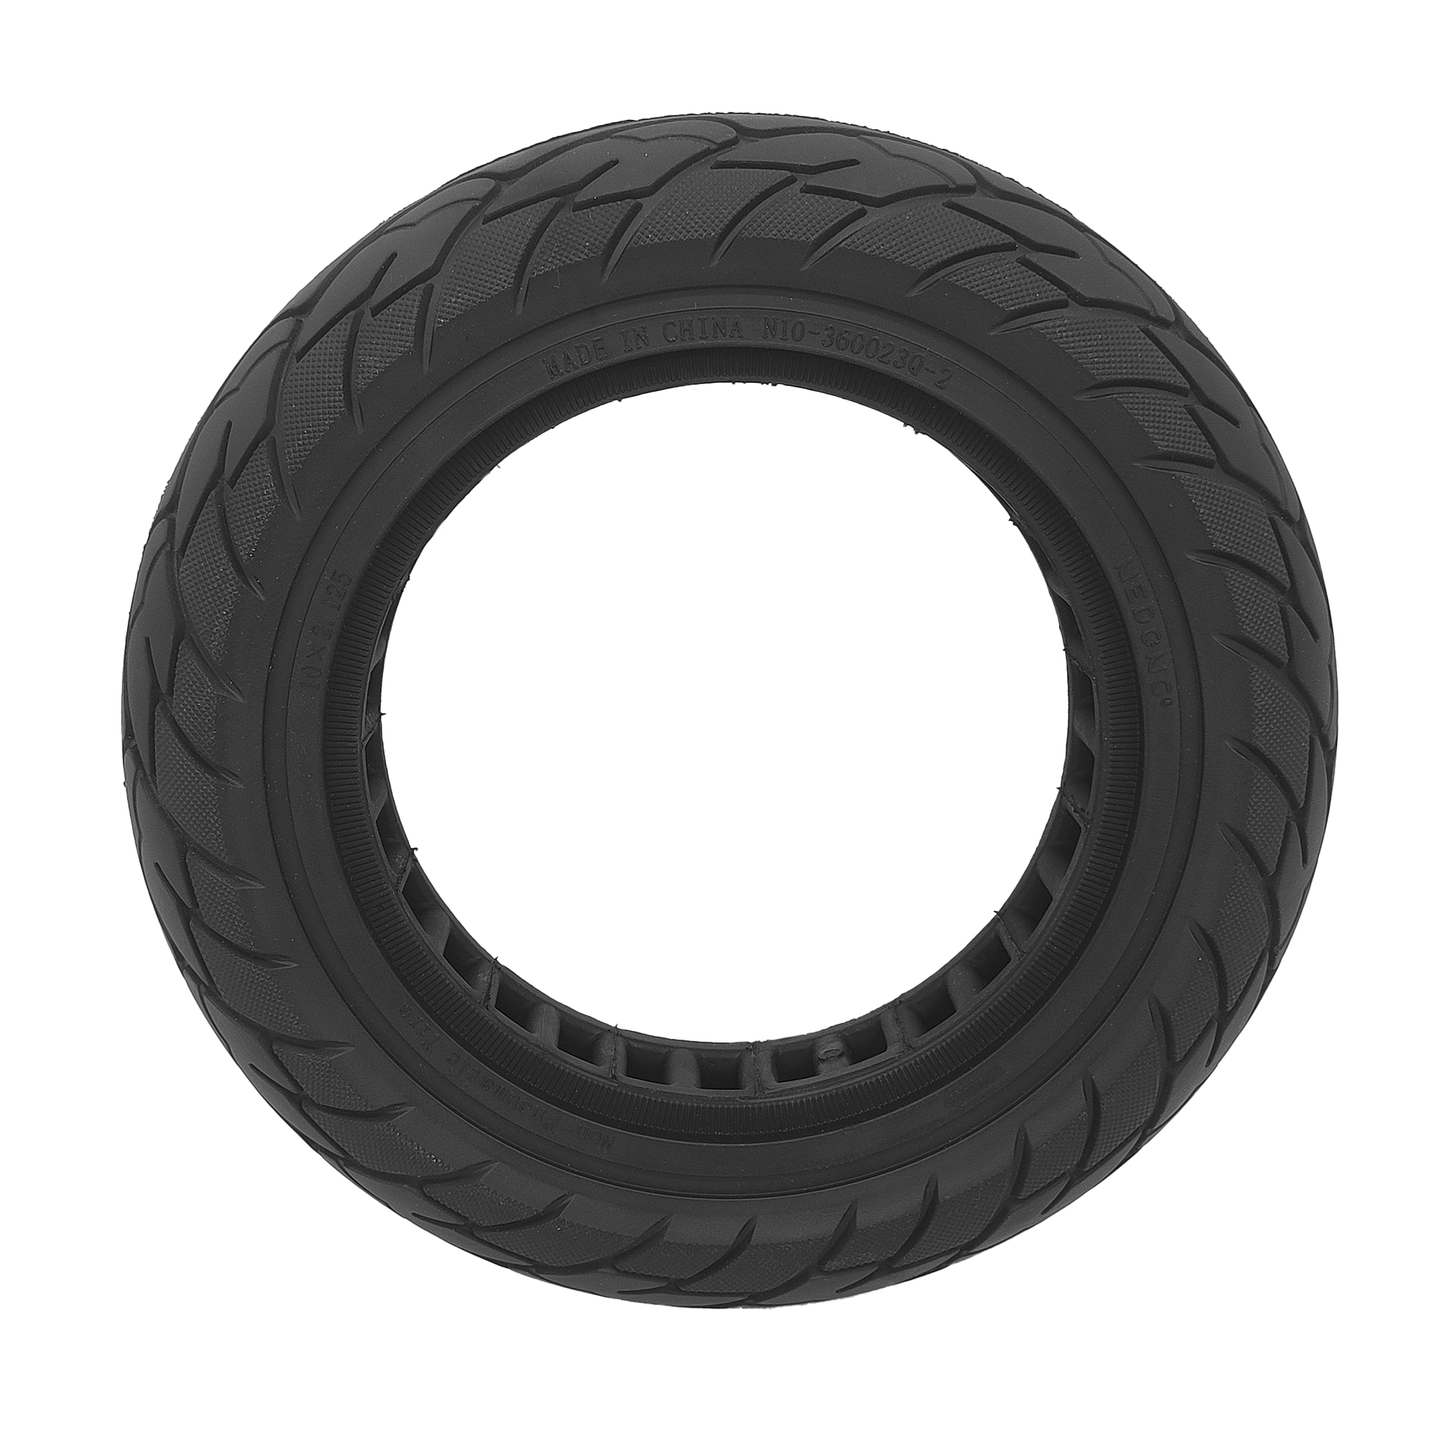 10x2.125 solid rubber tire black Nendong 34mm